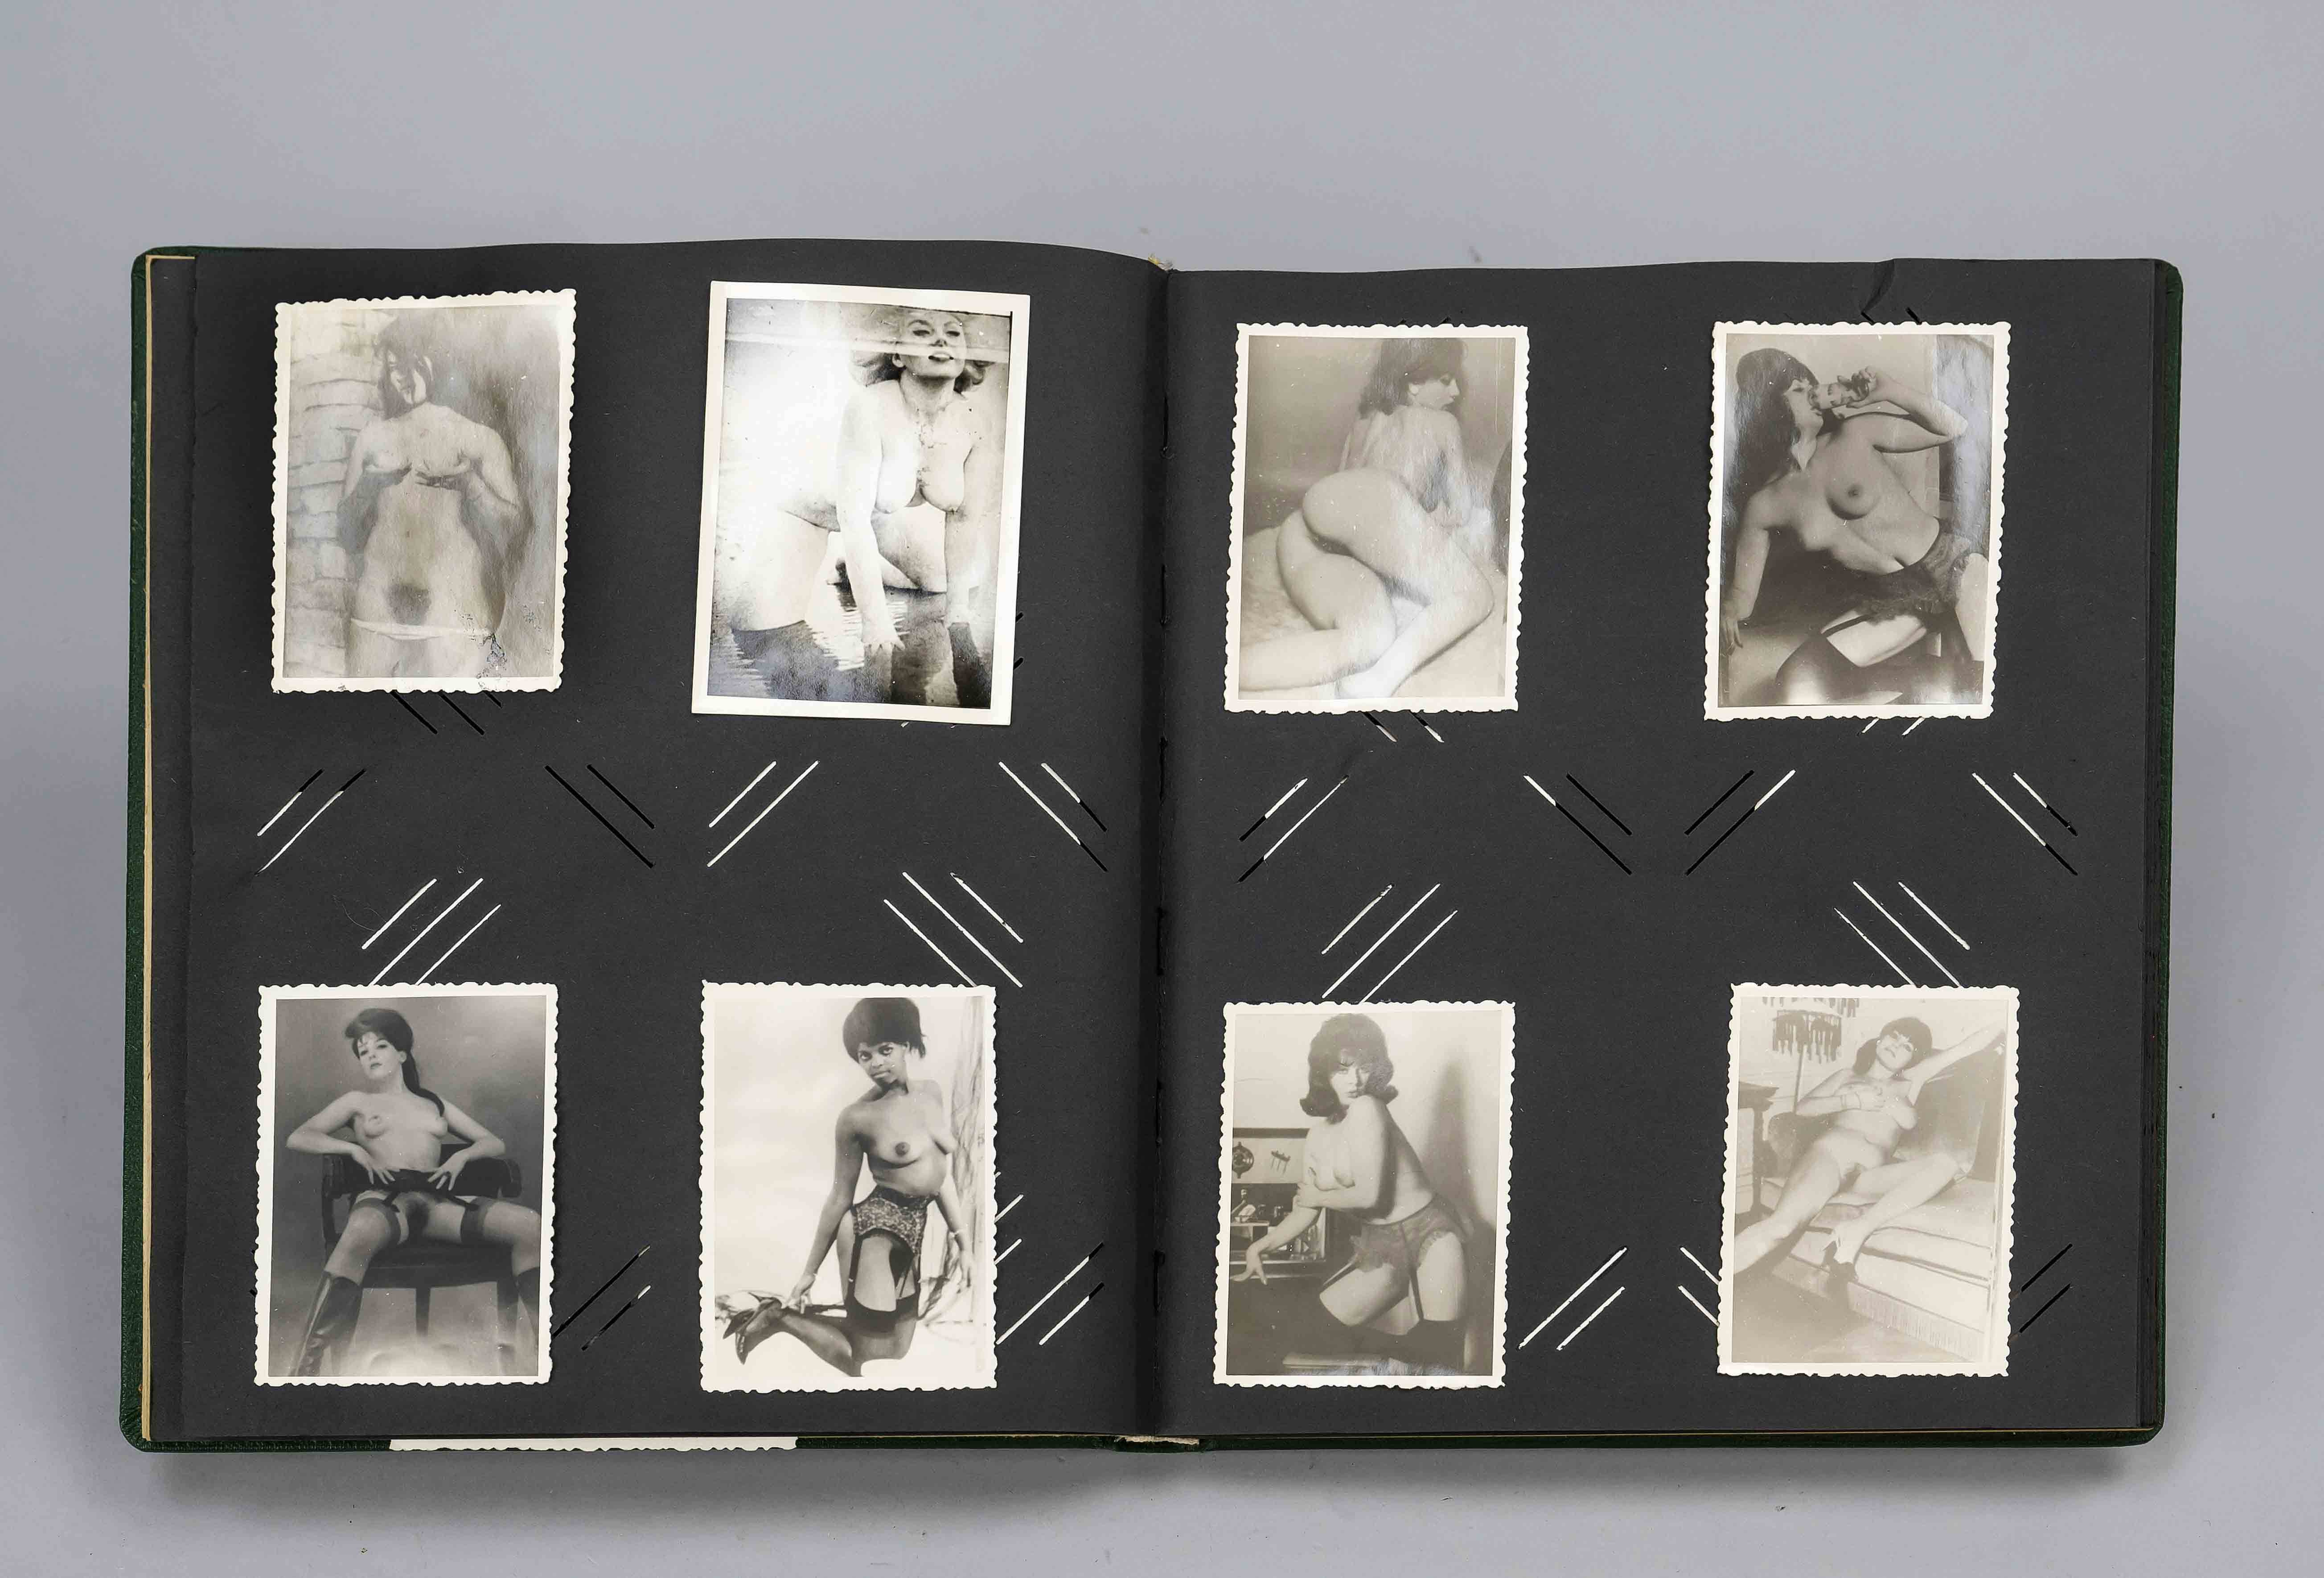 Photo album erotic, ca 1960s. Stock album with approx. 50 mostly glued-on explicit bw photos of